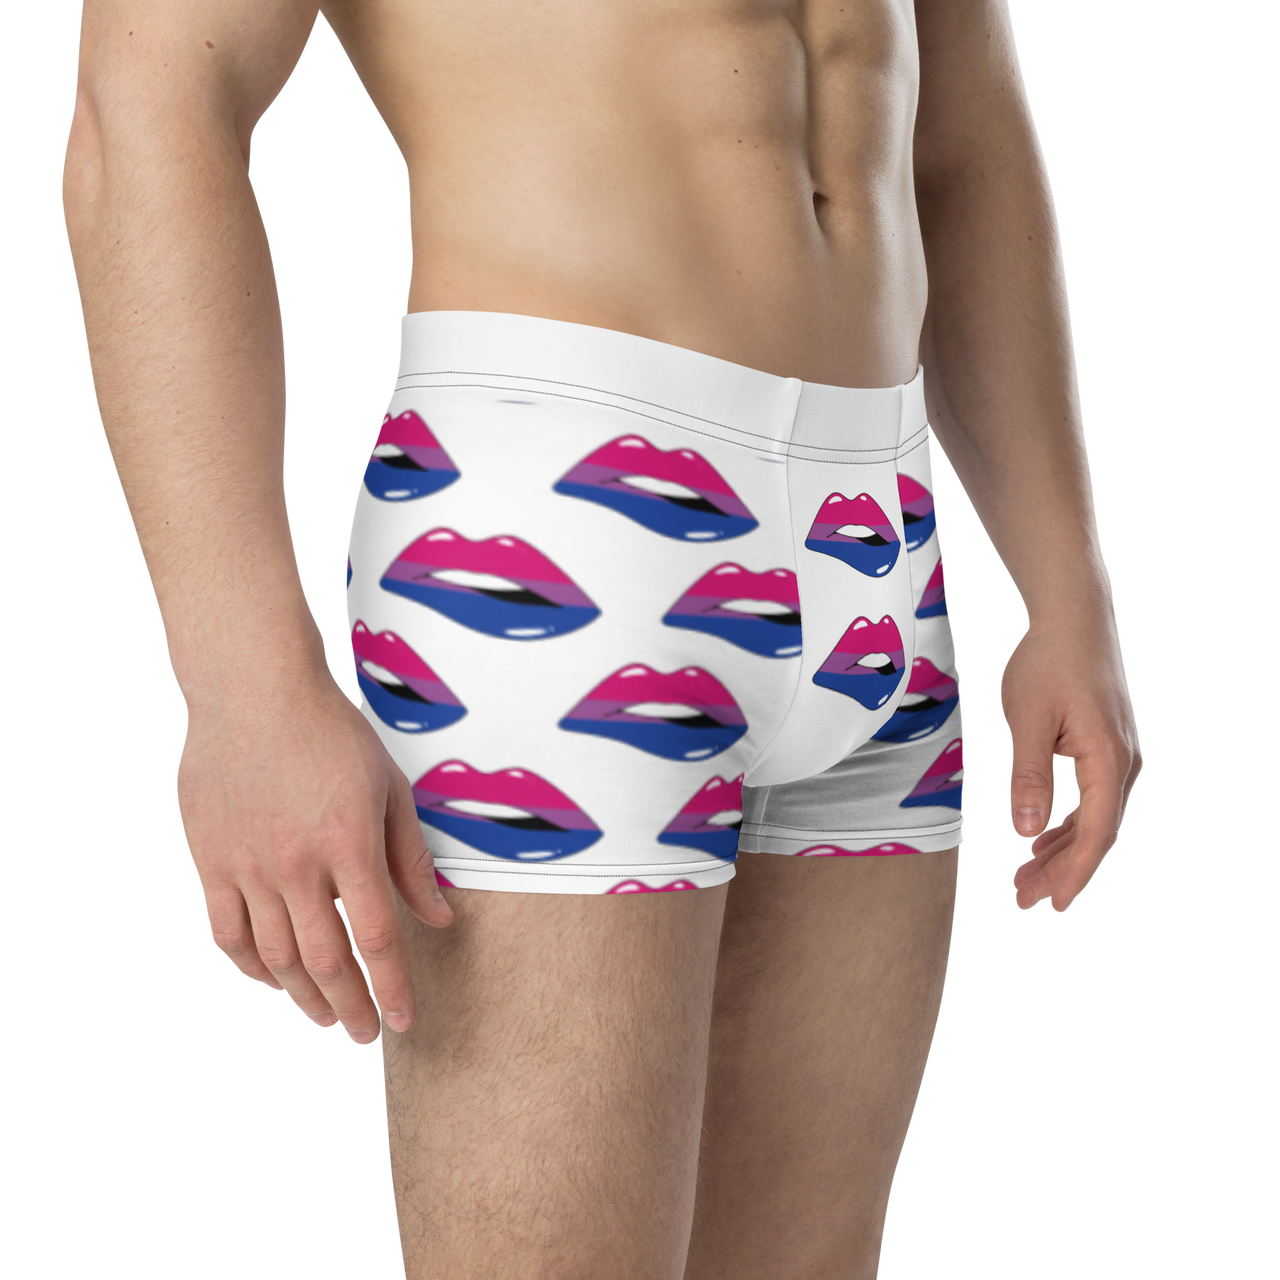 Bisexual Flag LGBTQ Kisses Underwear for Her/Him or They/Them - White SHAVA